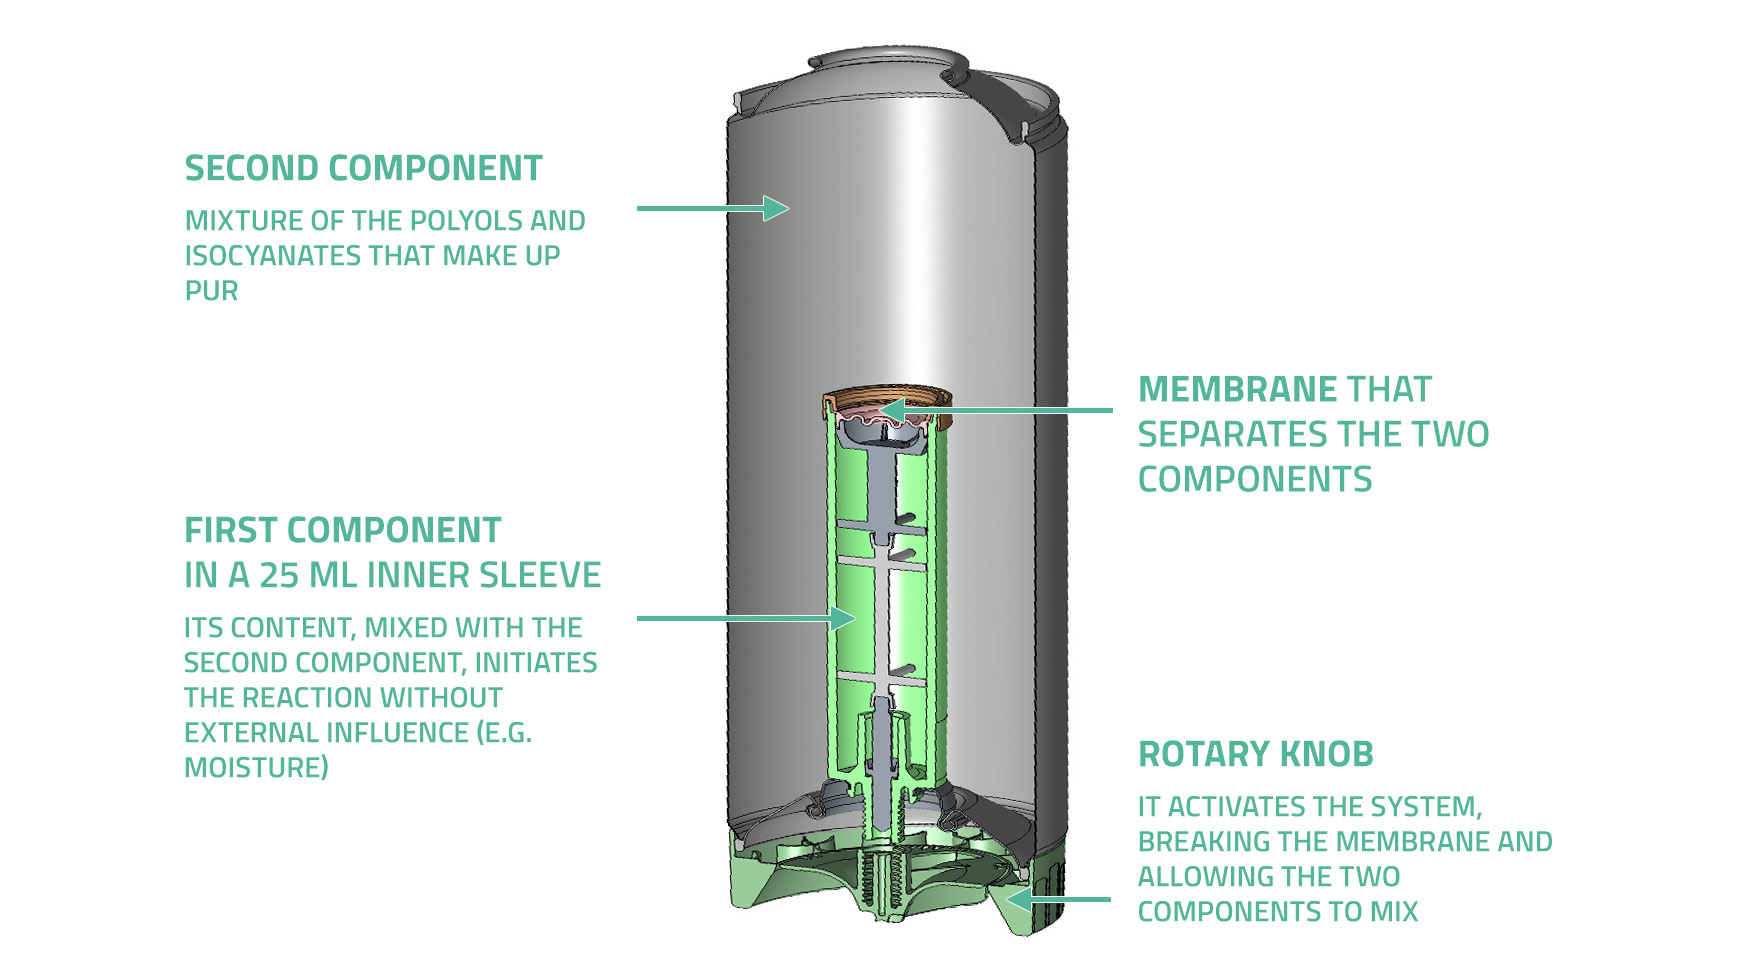 Components of the can